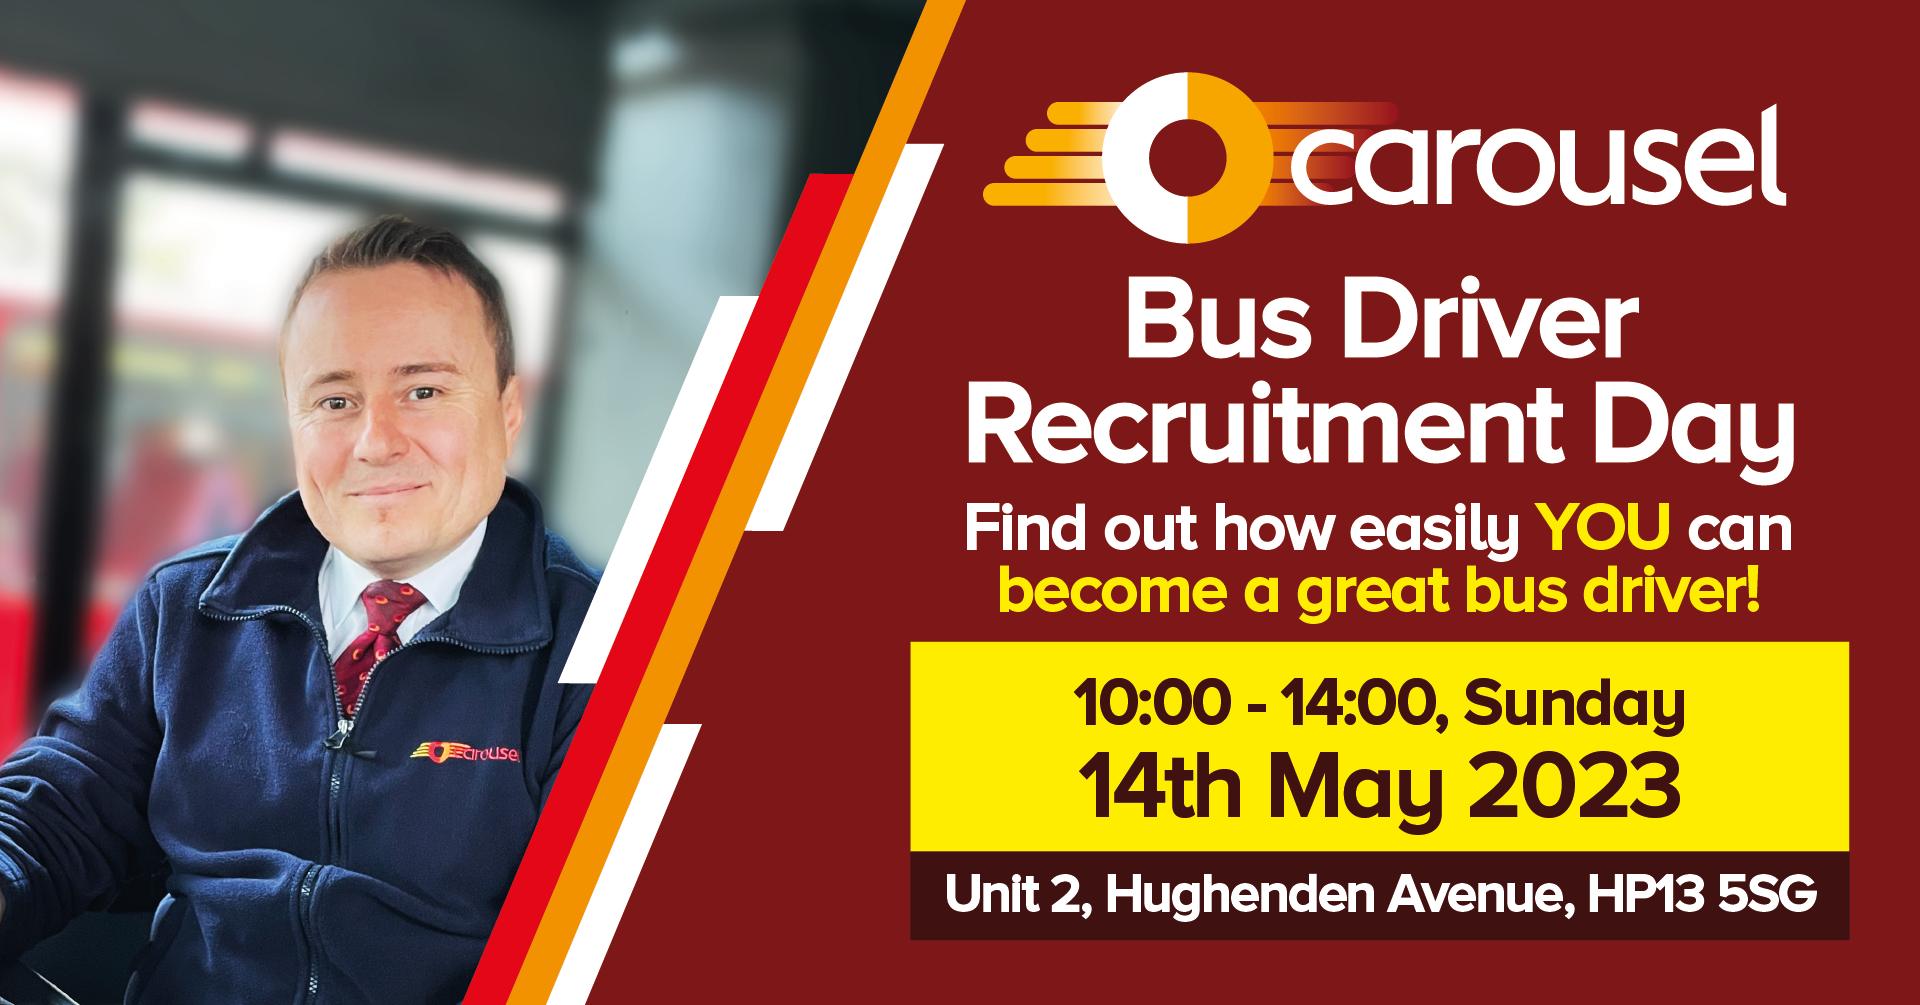 Bus Driver Recruitment Day Carousel Buses